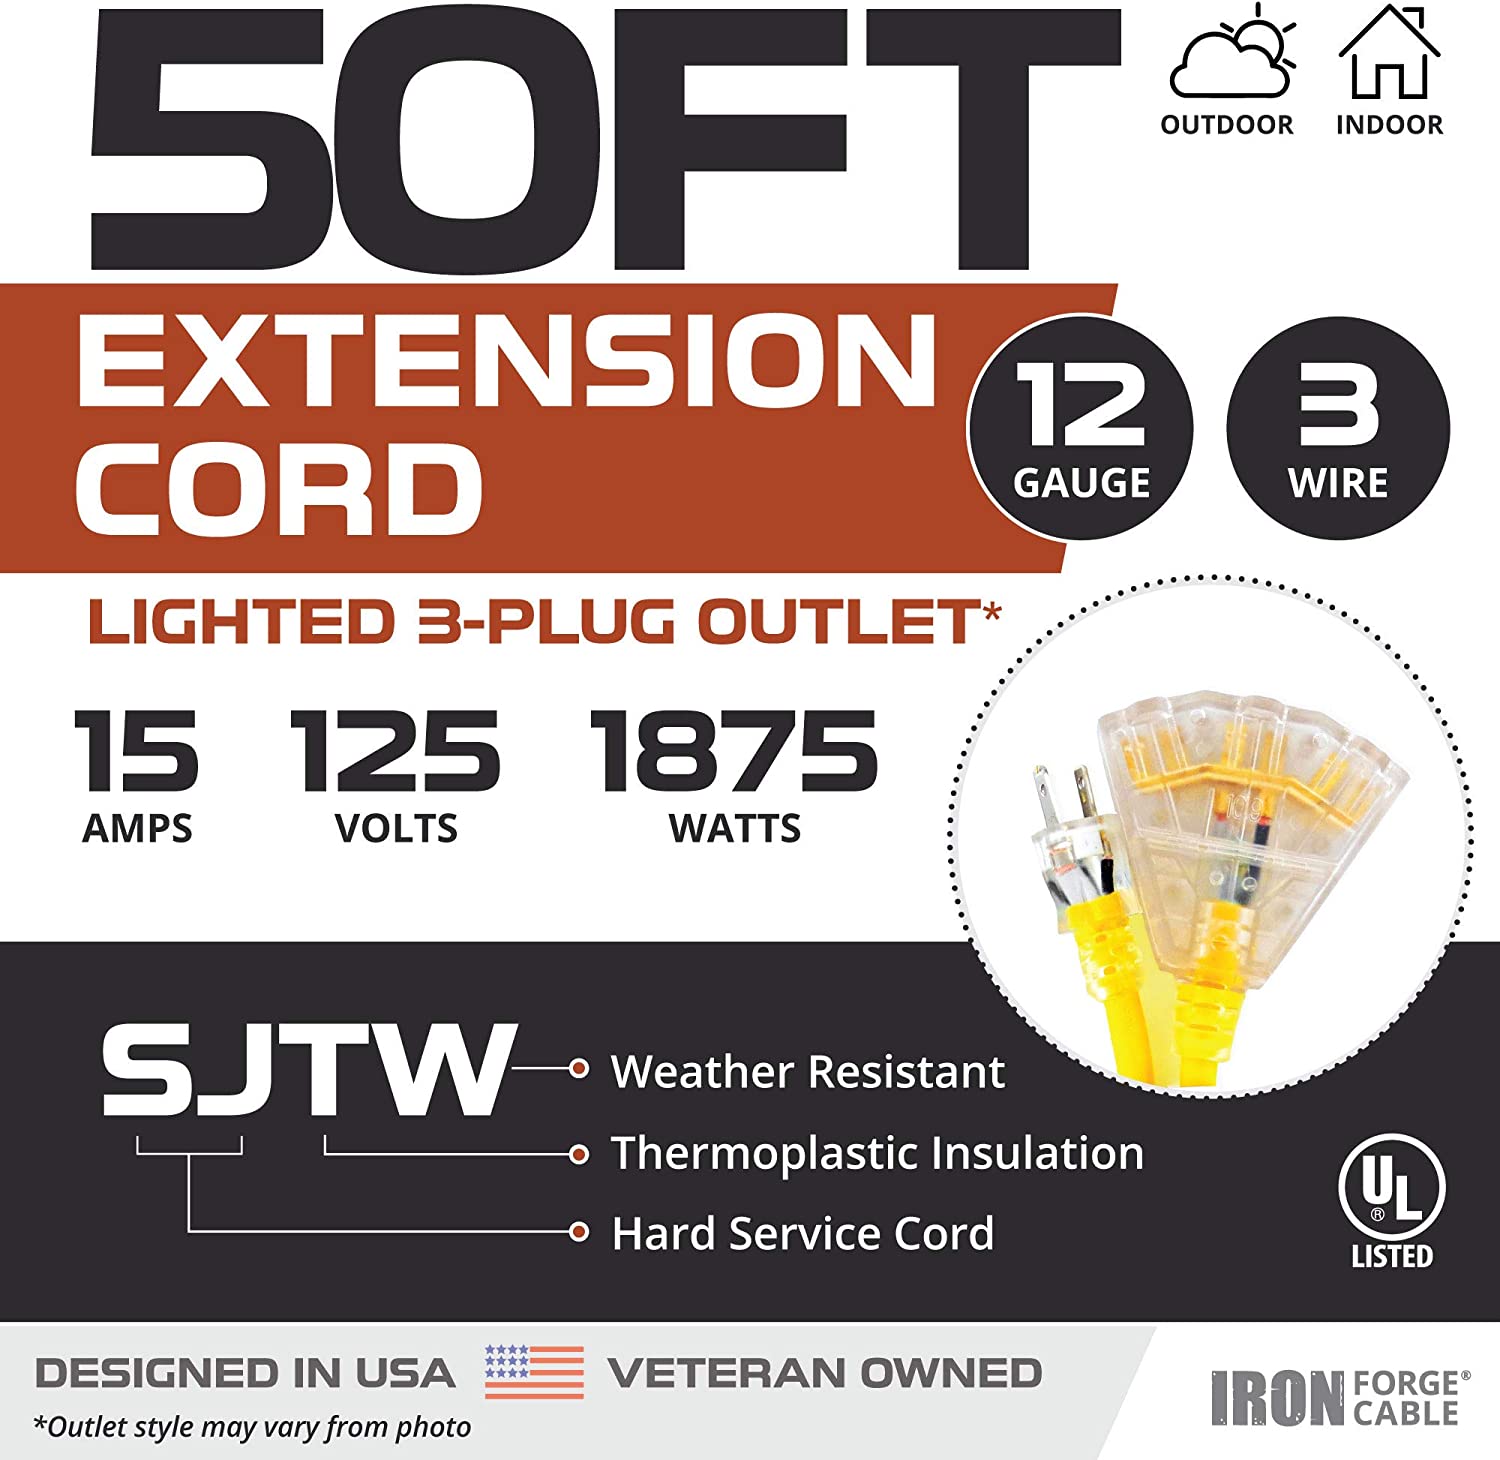 50 Foot Lighted Outdoor Extension Cord with 3 Electrical Power